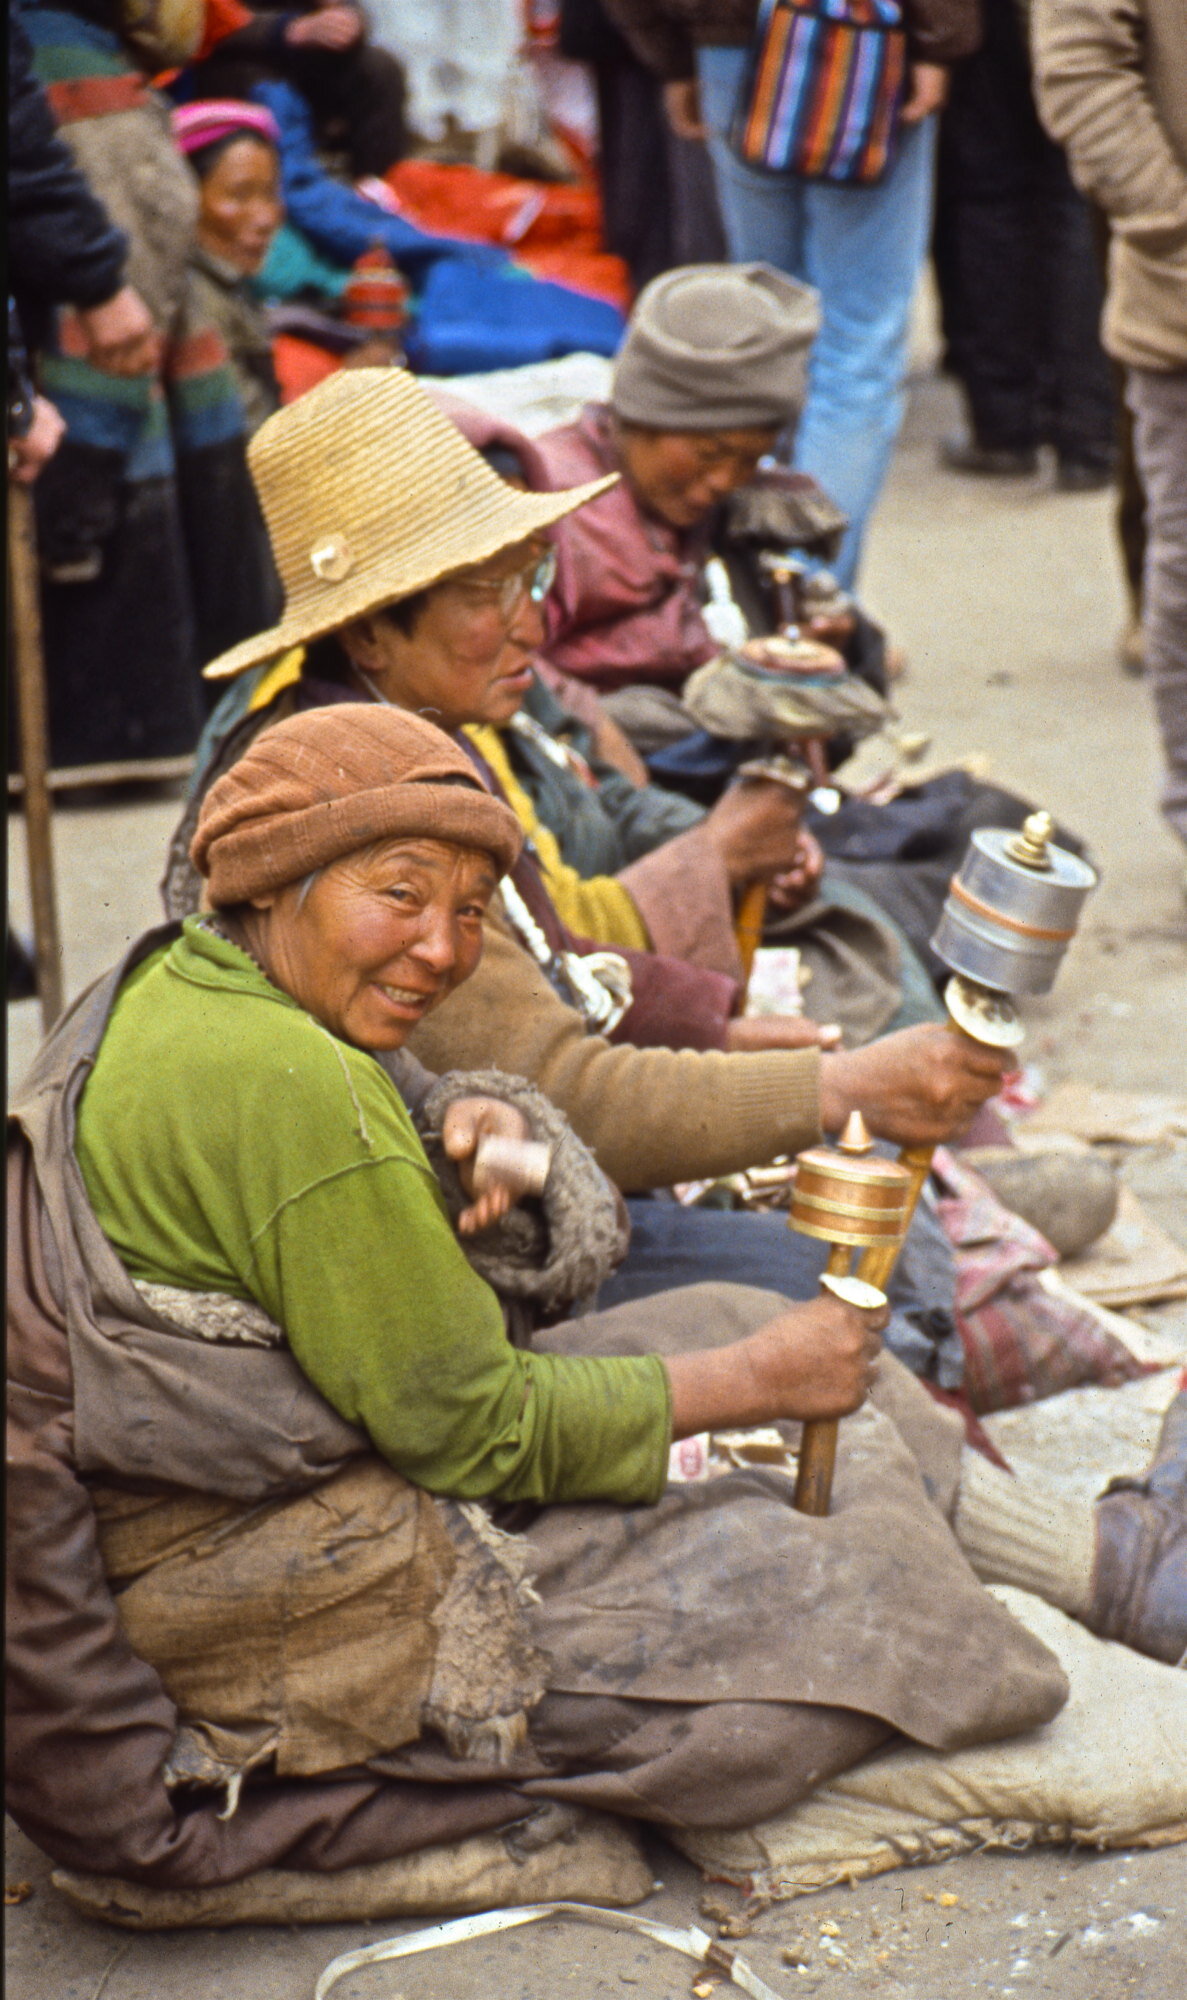 Instead of orally offering prayers, the Tibetans insert a mantra into a prayer wheel which they constantly keep spinning.